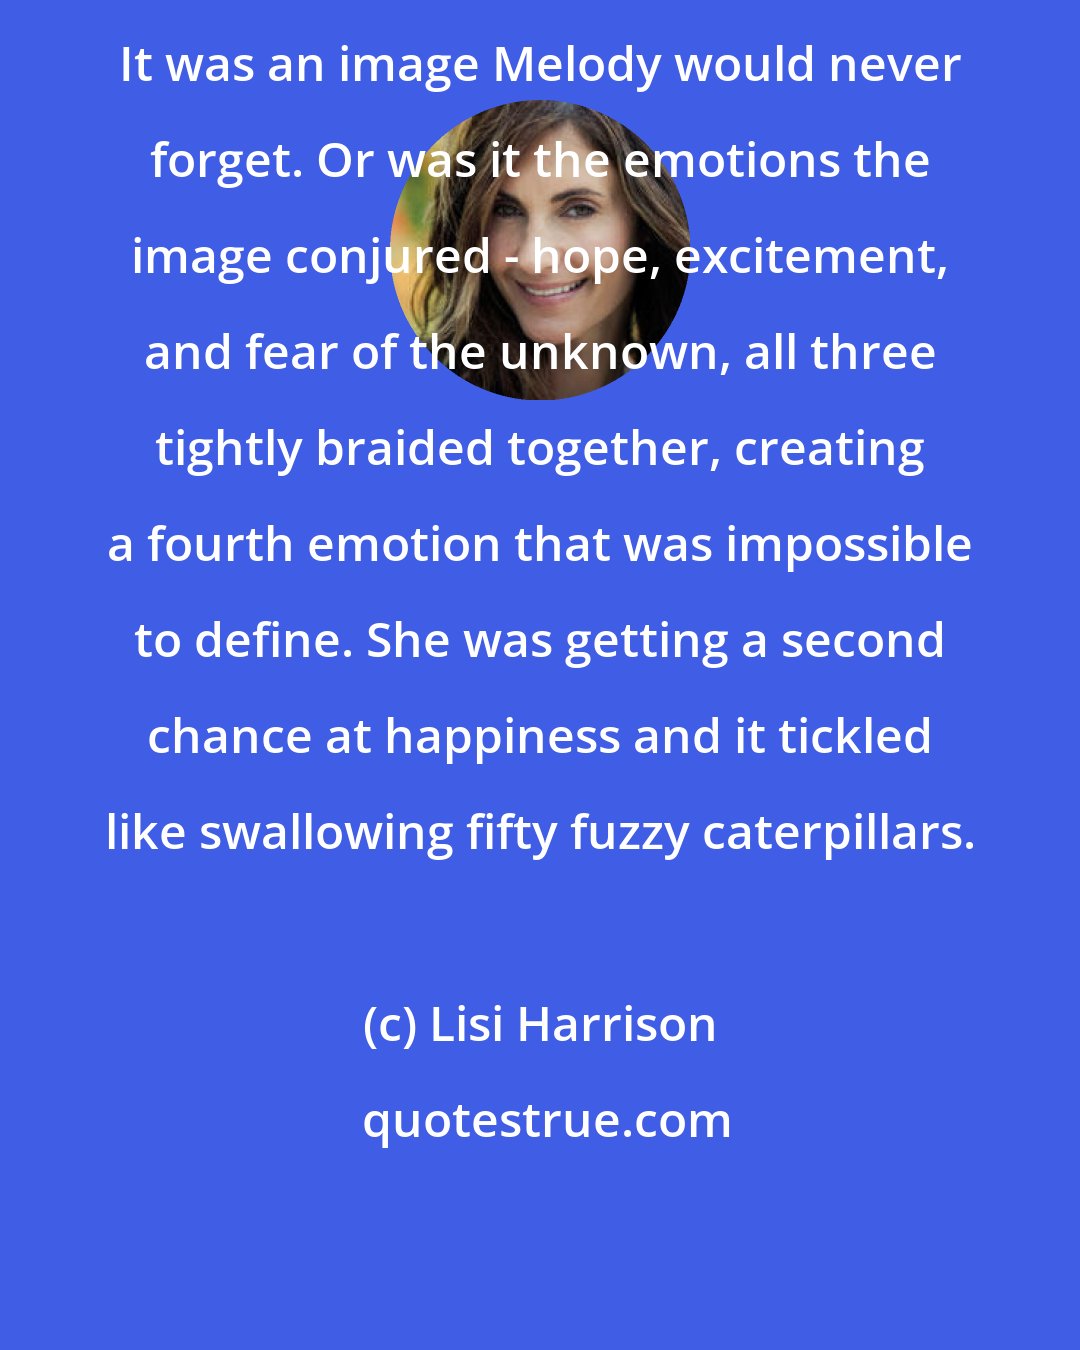 Lisi Harrison: It was an image Melody would never forget. Or was it the emotions the image conjured - hope, excitement, and fear of the unknown, all three tightly braided together, creating a fourth emotion that was impossible to define. She was getting a second chance at happiness and it tickled like swallowing fifty fuzzy caterpillars.